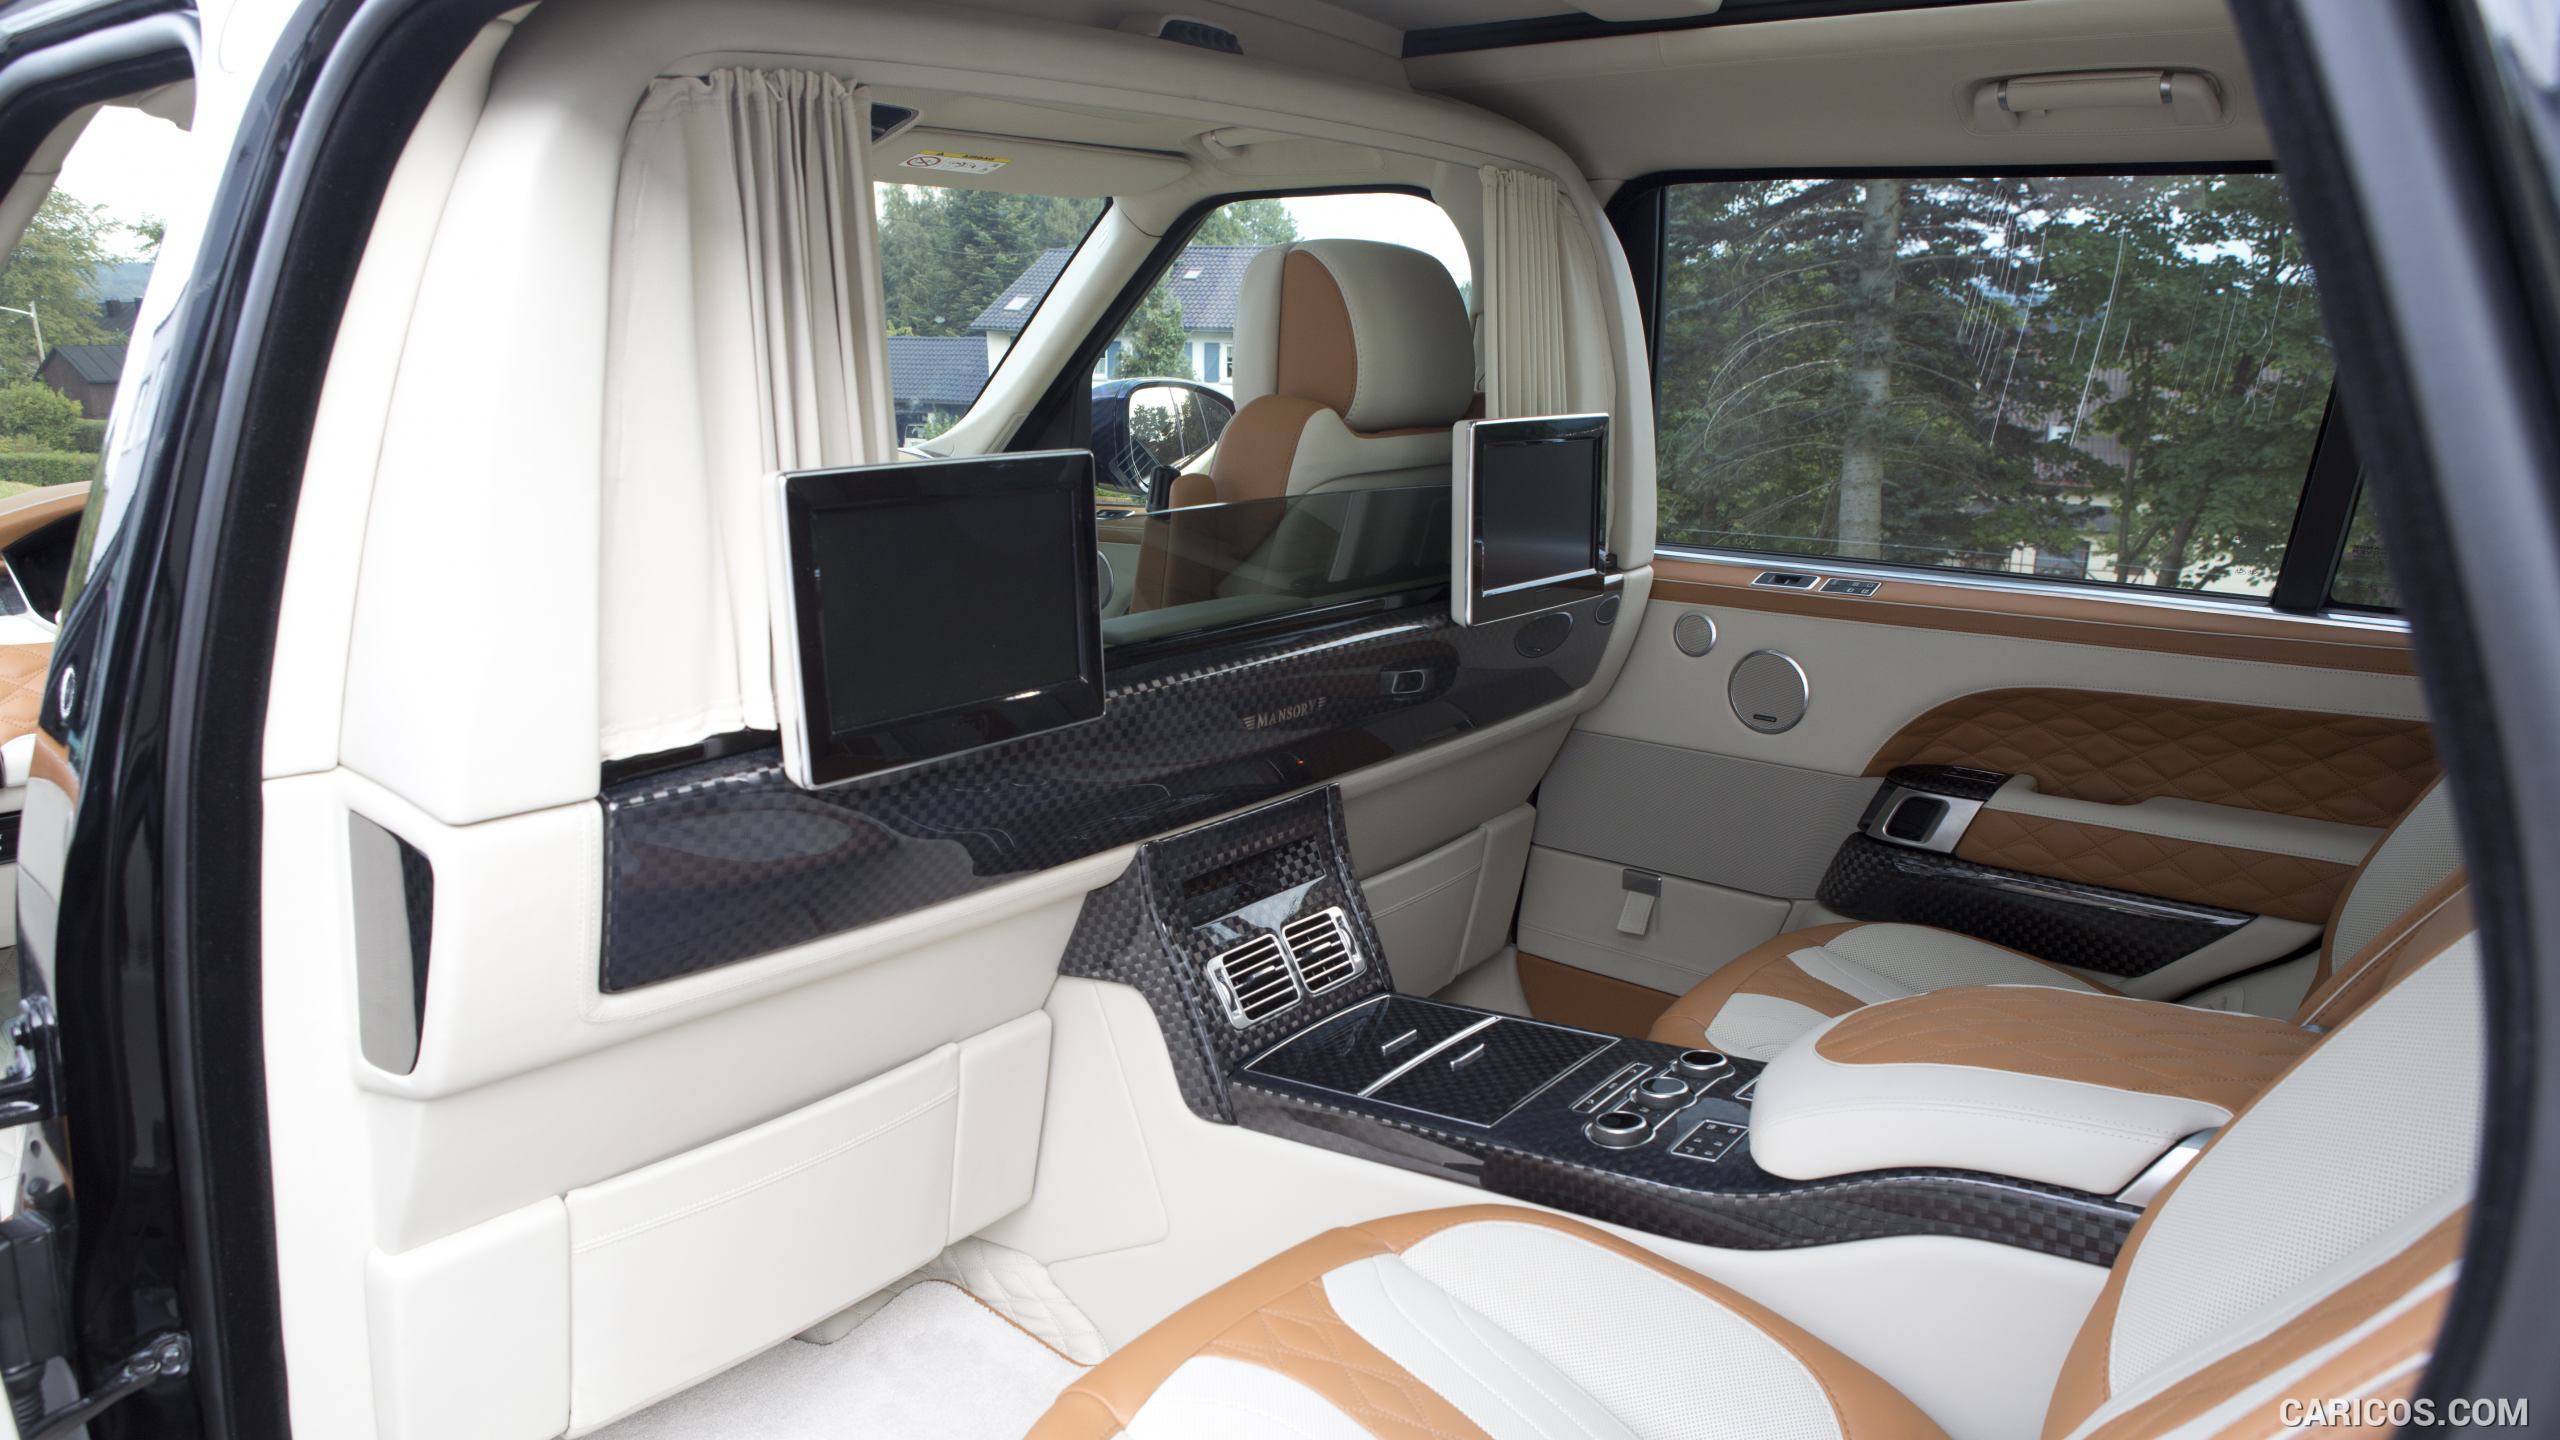 2016 MANSORY Range Rover Autobiography Extended - Interior Rear Seats, #10 of 12